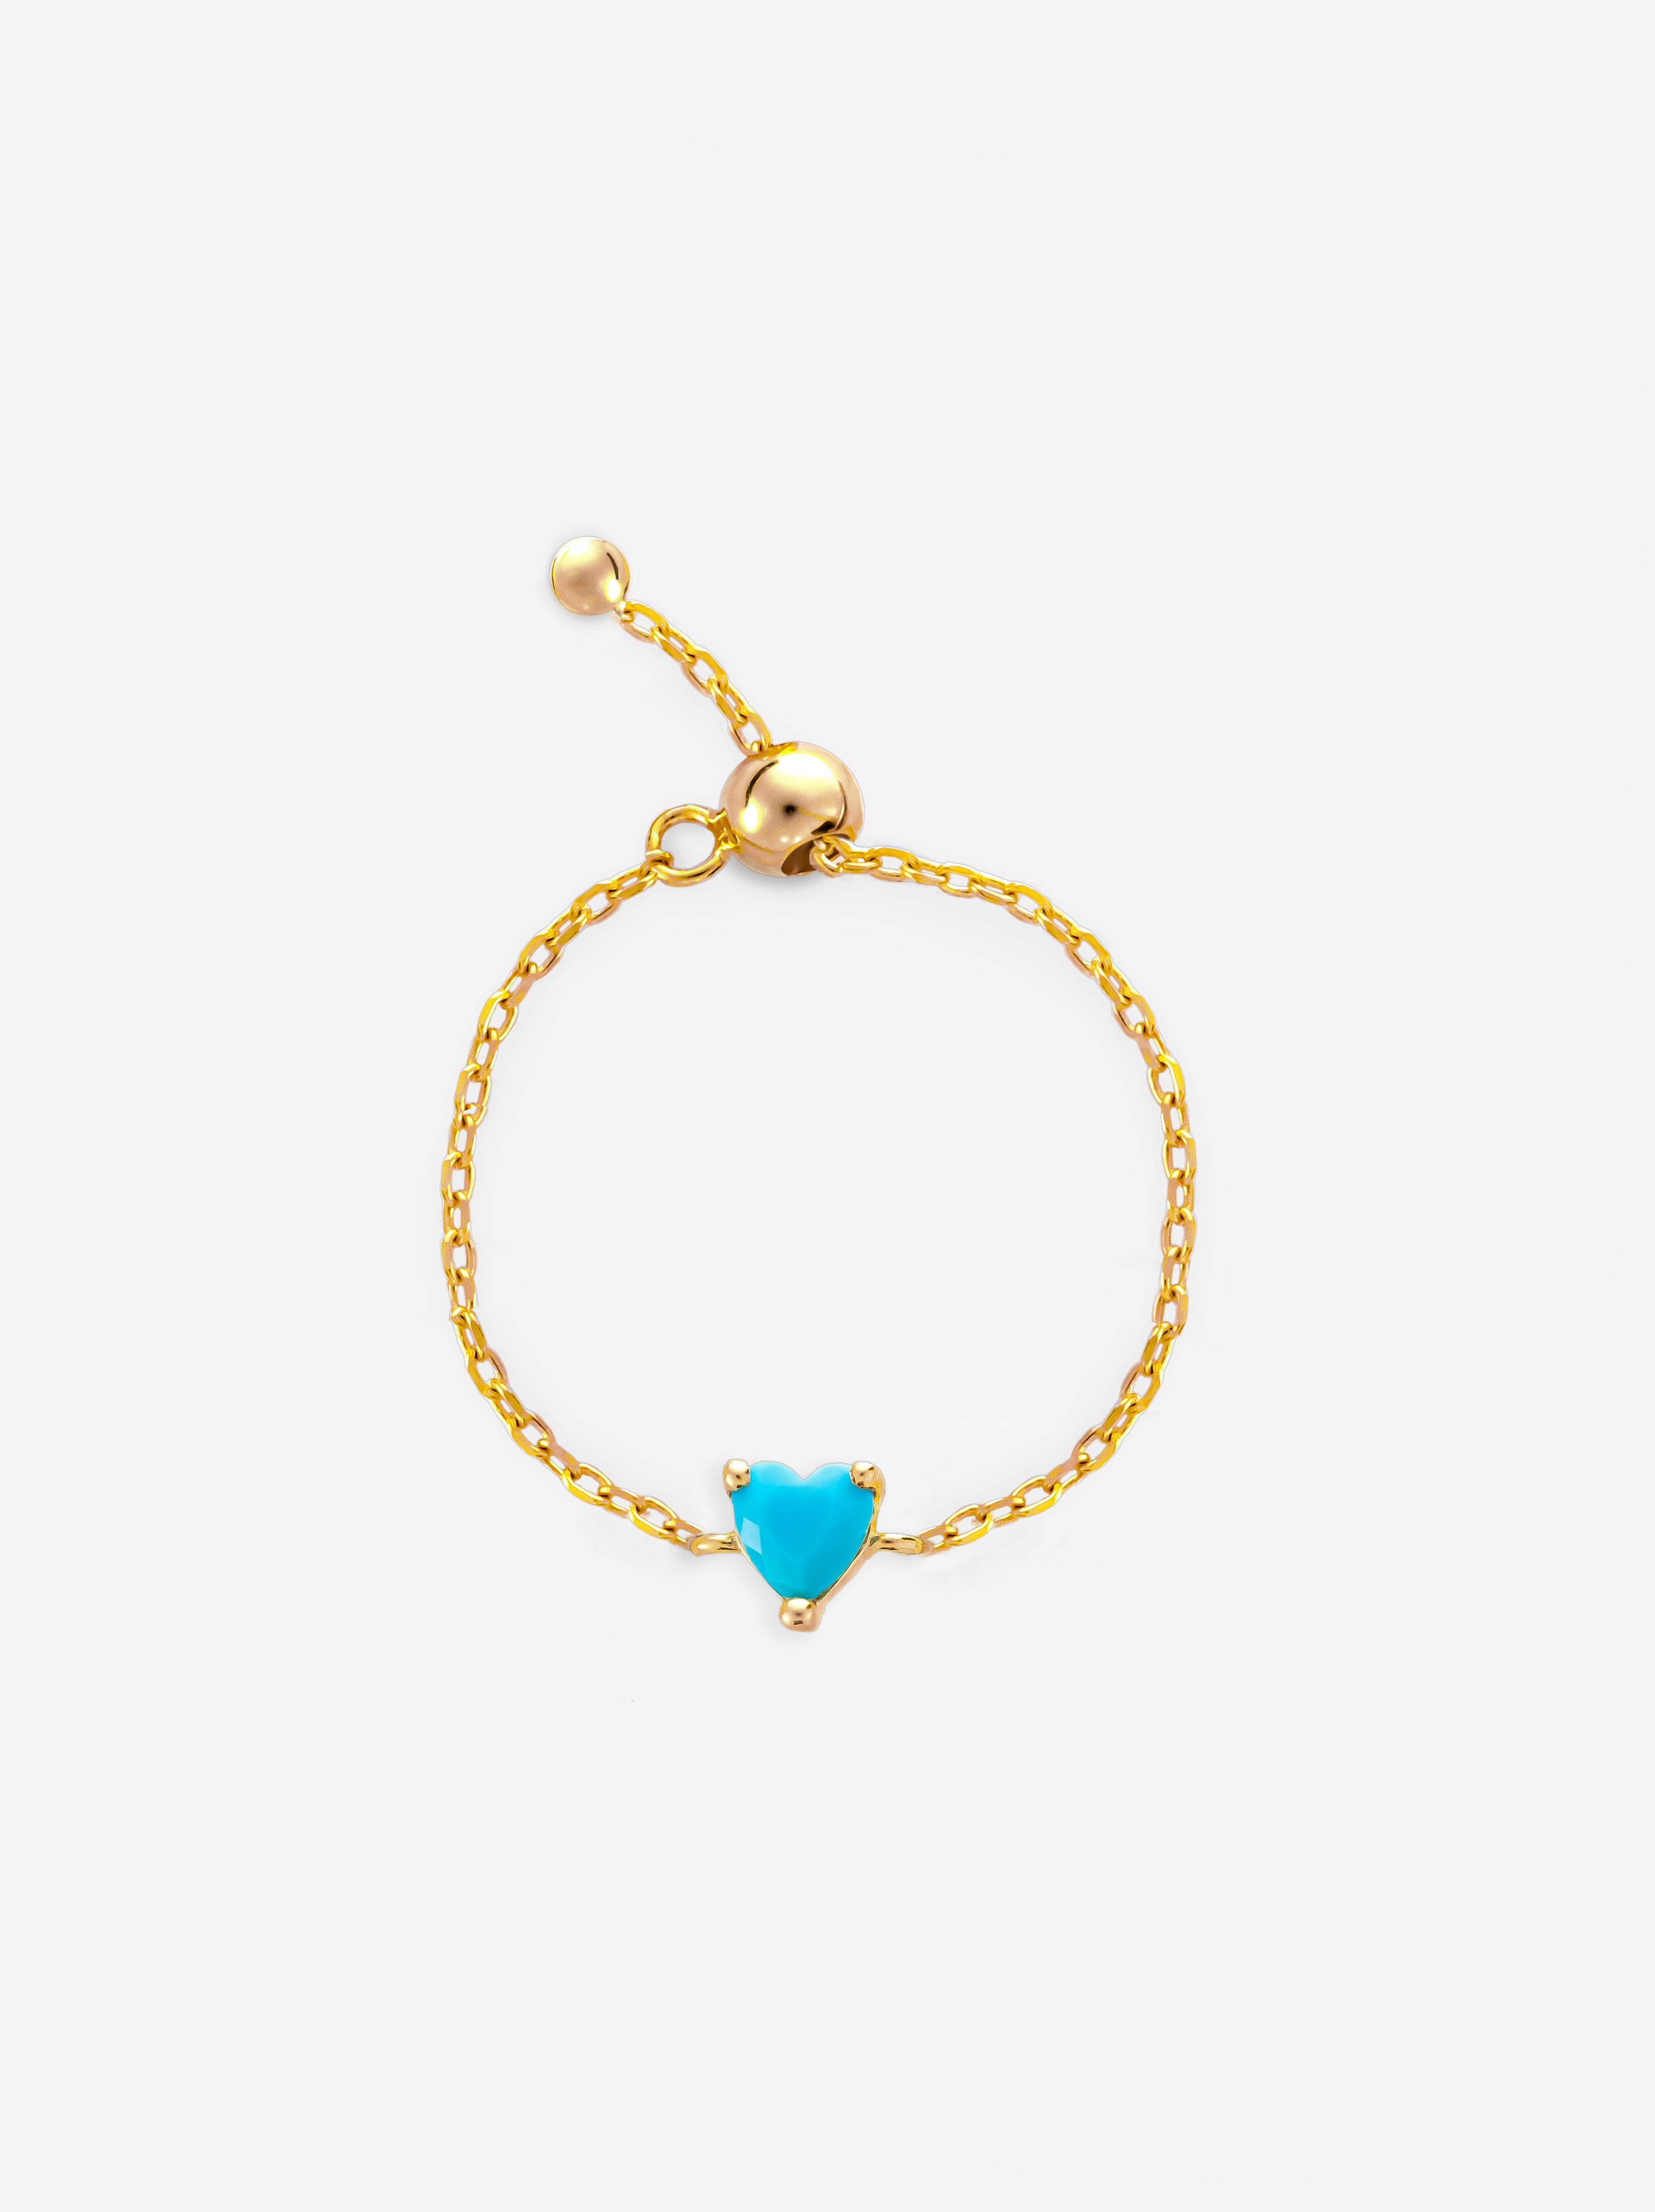 Adjustable Chain Ring With Turquoise Heart